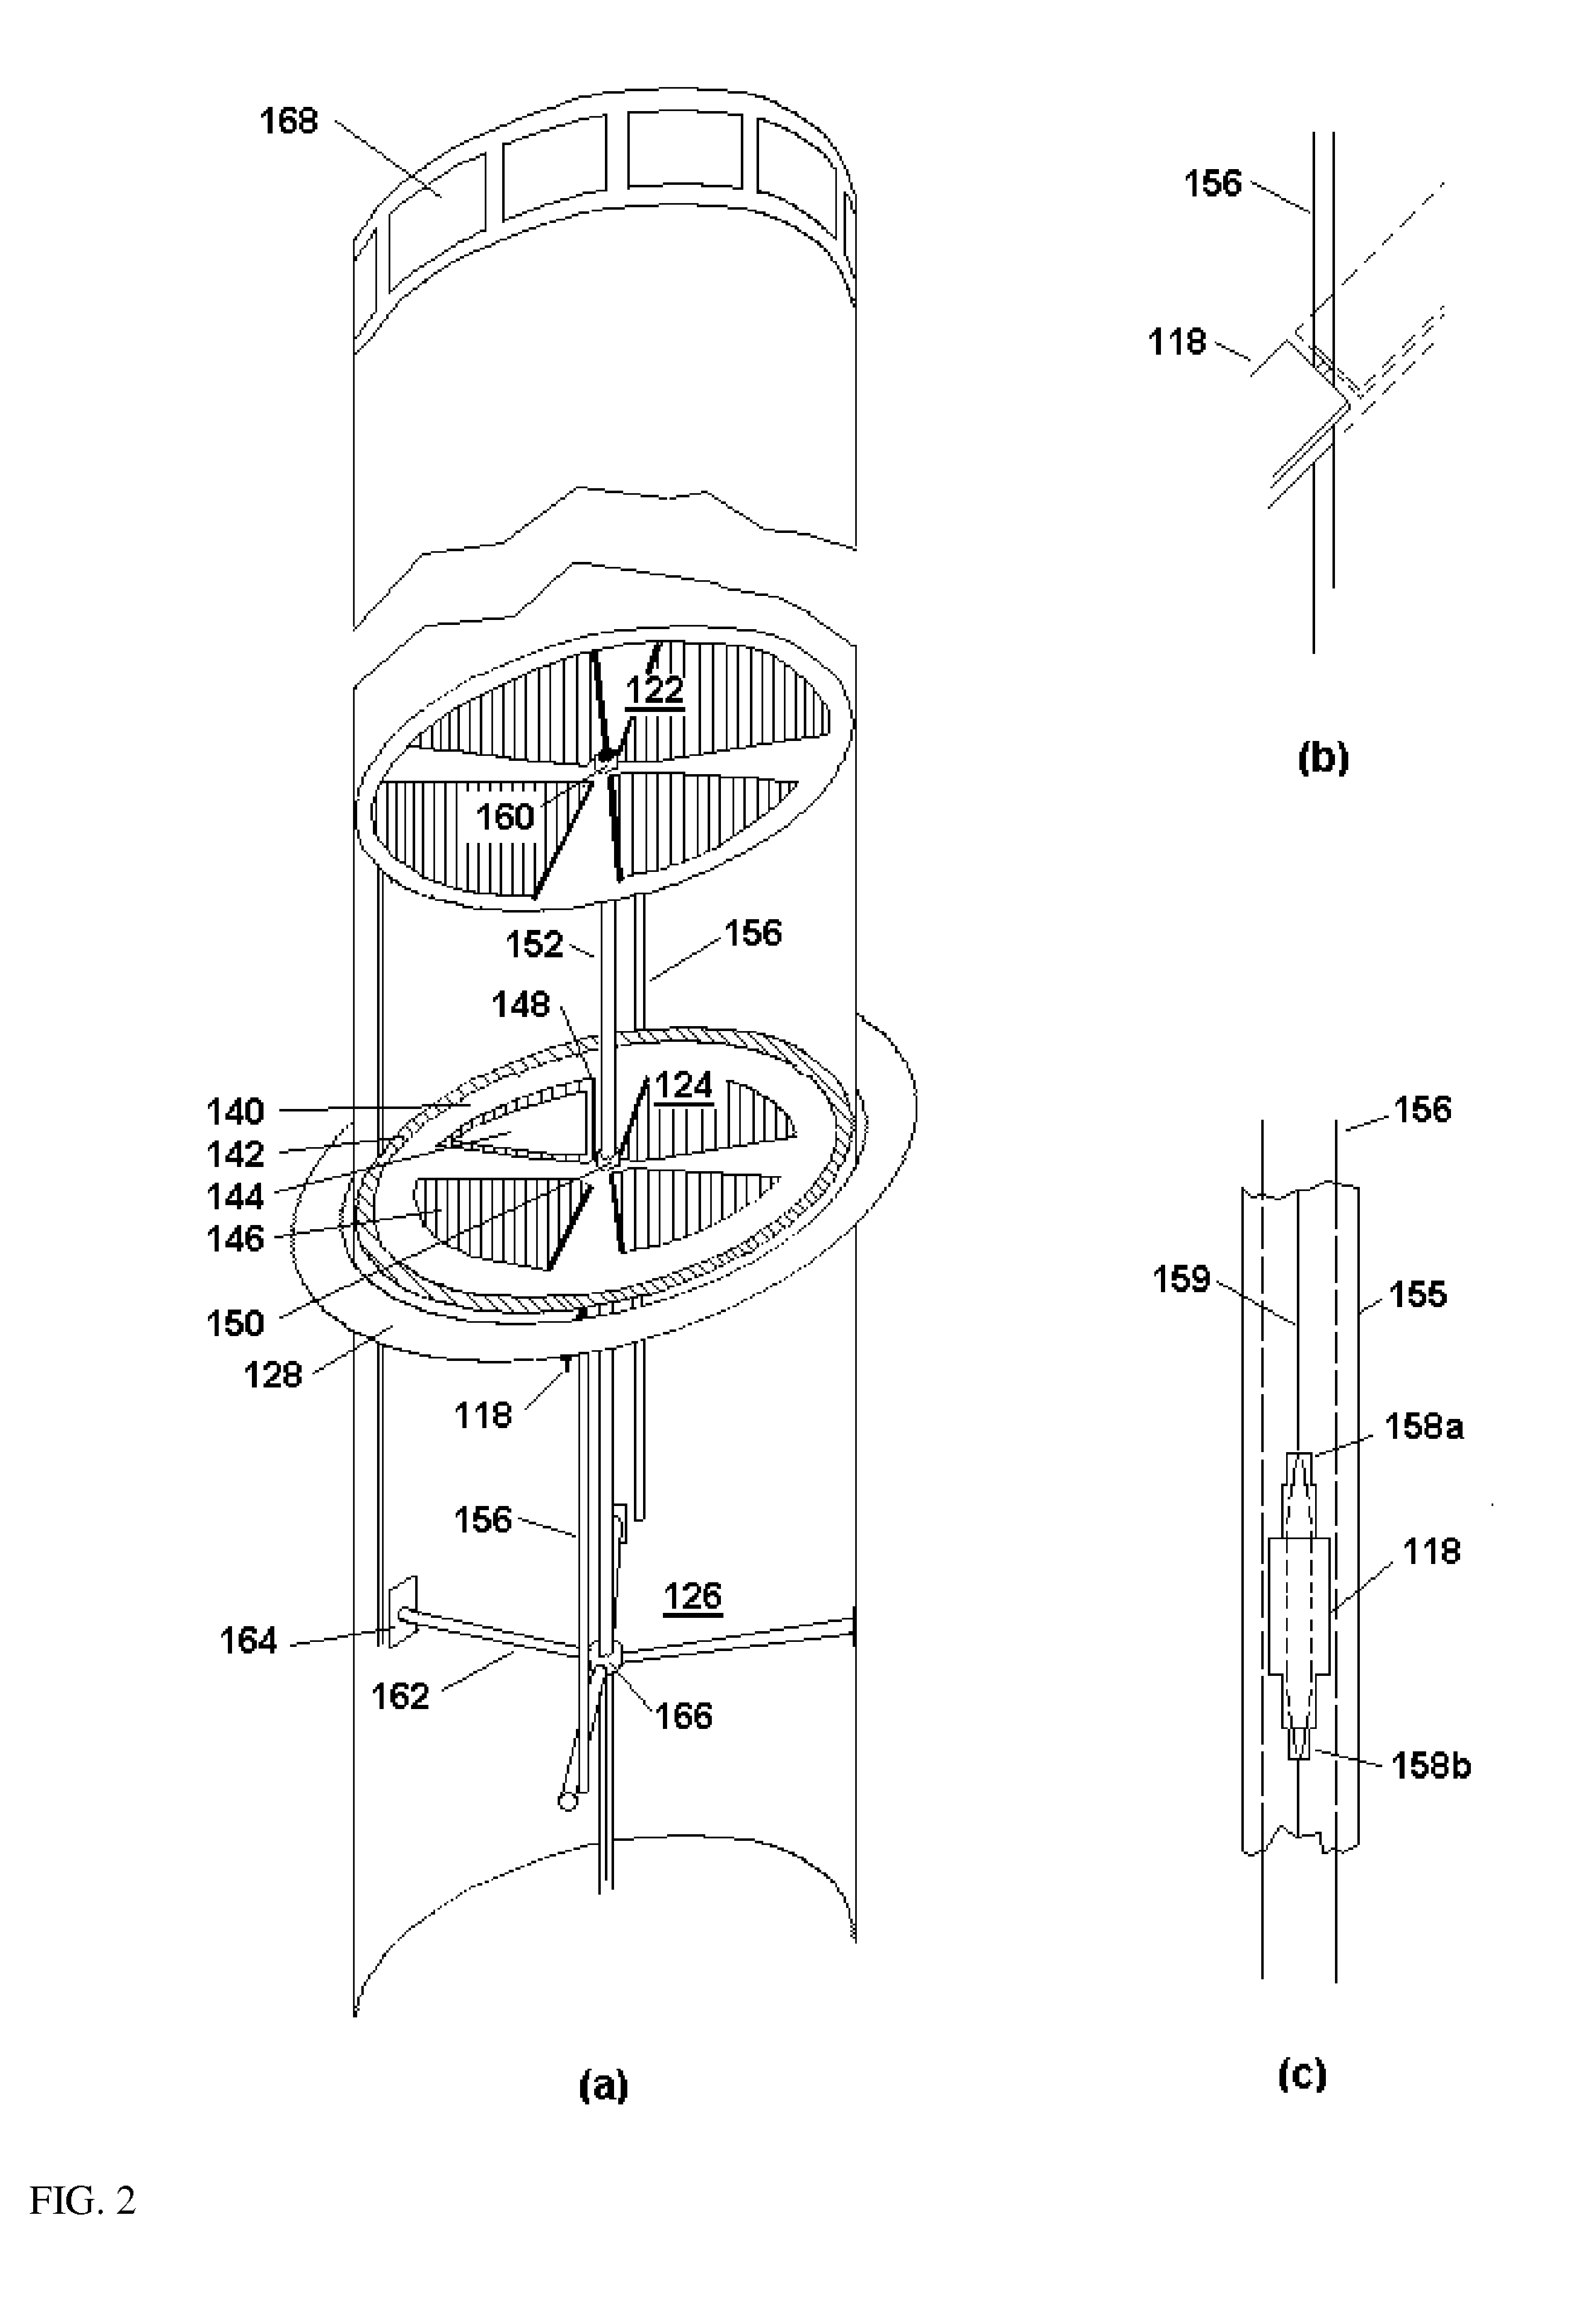 Apparatus and method for inhibiting the formation of tropical cyclones